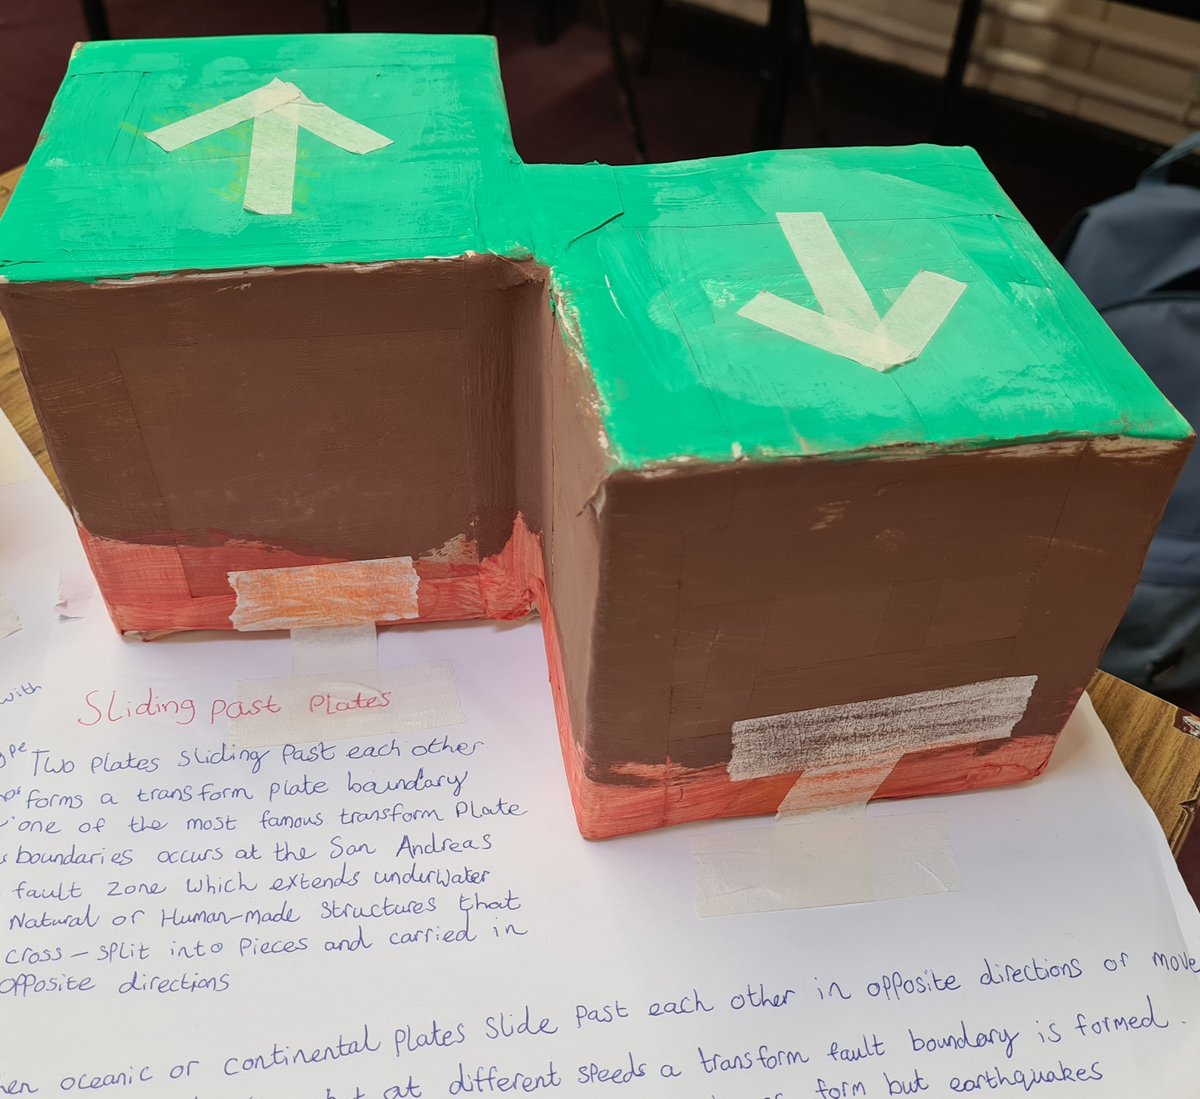 Our Junior Cycle #Geography students at @AbbeyVS are celebrating #GeoWeek 2021.
Mr Clarke's 1st Year class have been busy creating geo-models - #processes, #patterns, #systems, #scale. 
#ThatsGeography #GeographyAwarenessWeek #GeoWeek2021 
#WeAreDonegalETB @DonegalETB